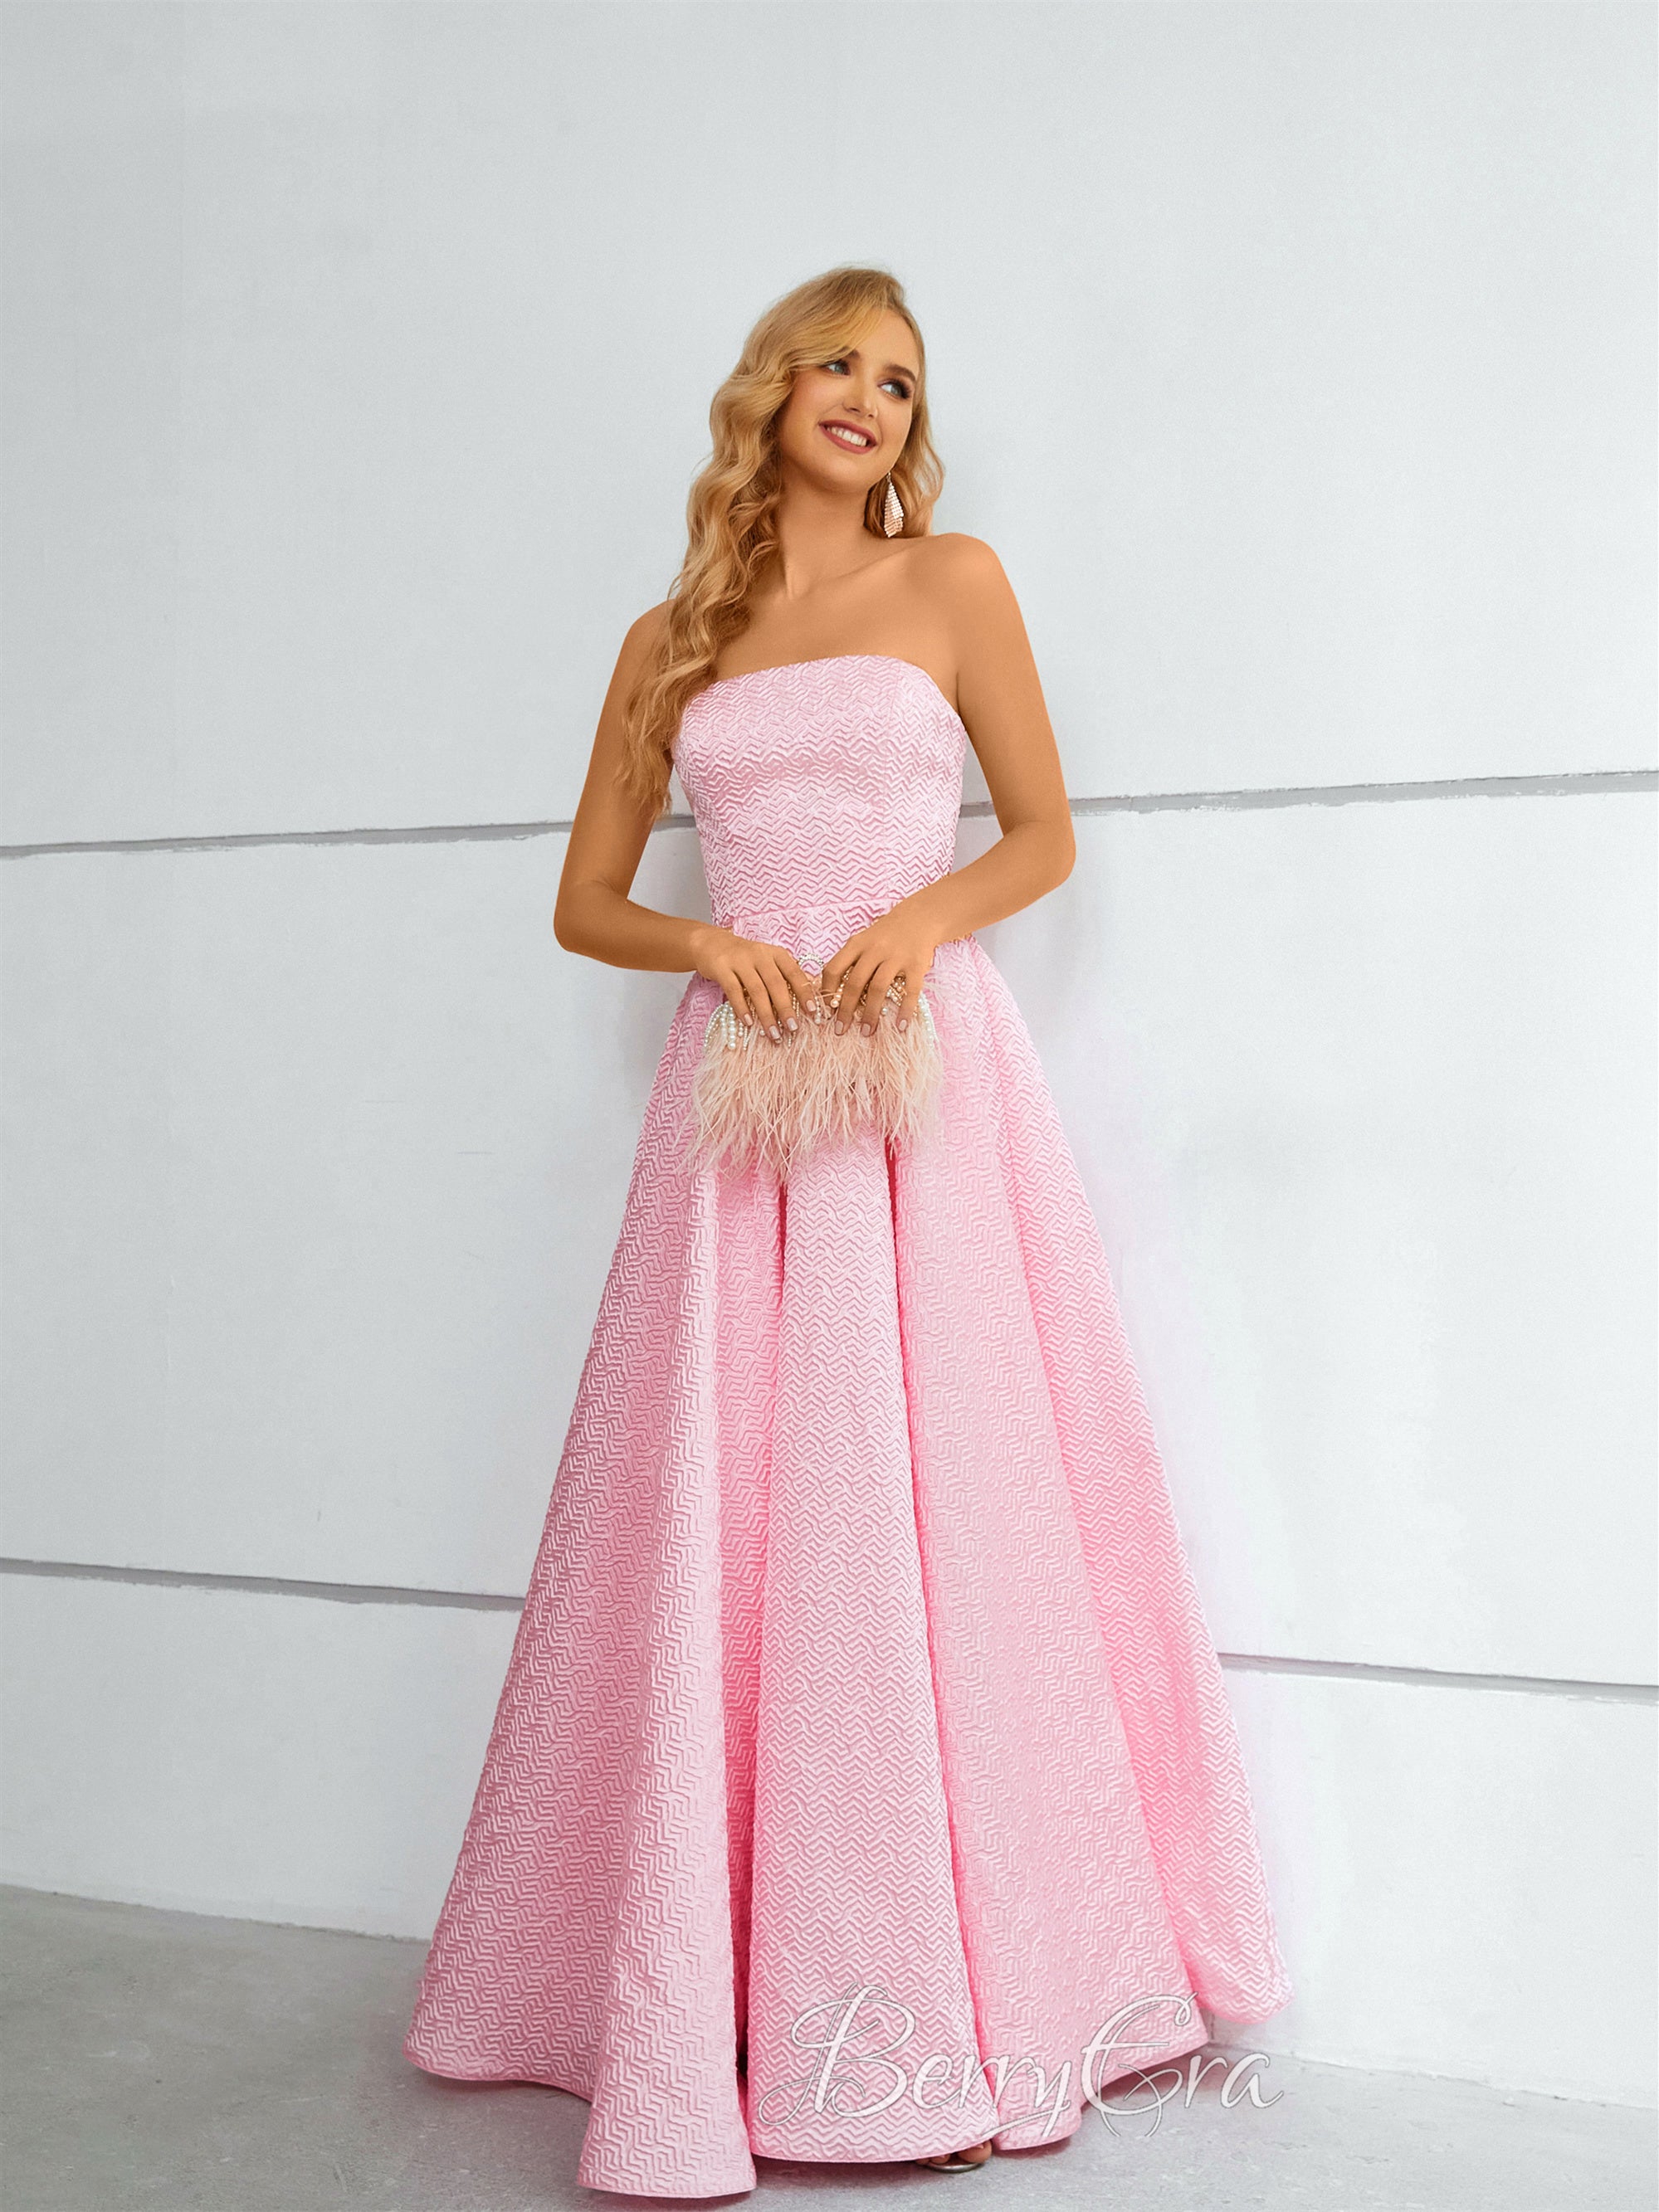 Pink Printed Satin A-line Prom Dresses, Simple Prom Dresses, Graduation Party Dresses, 2023 Prom Dresses